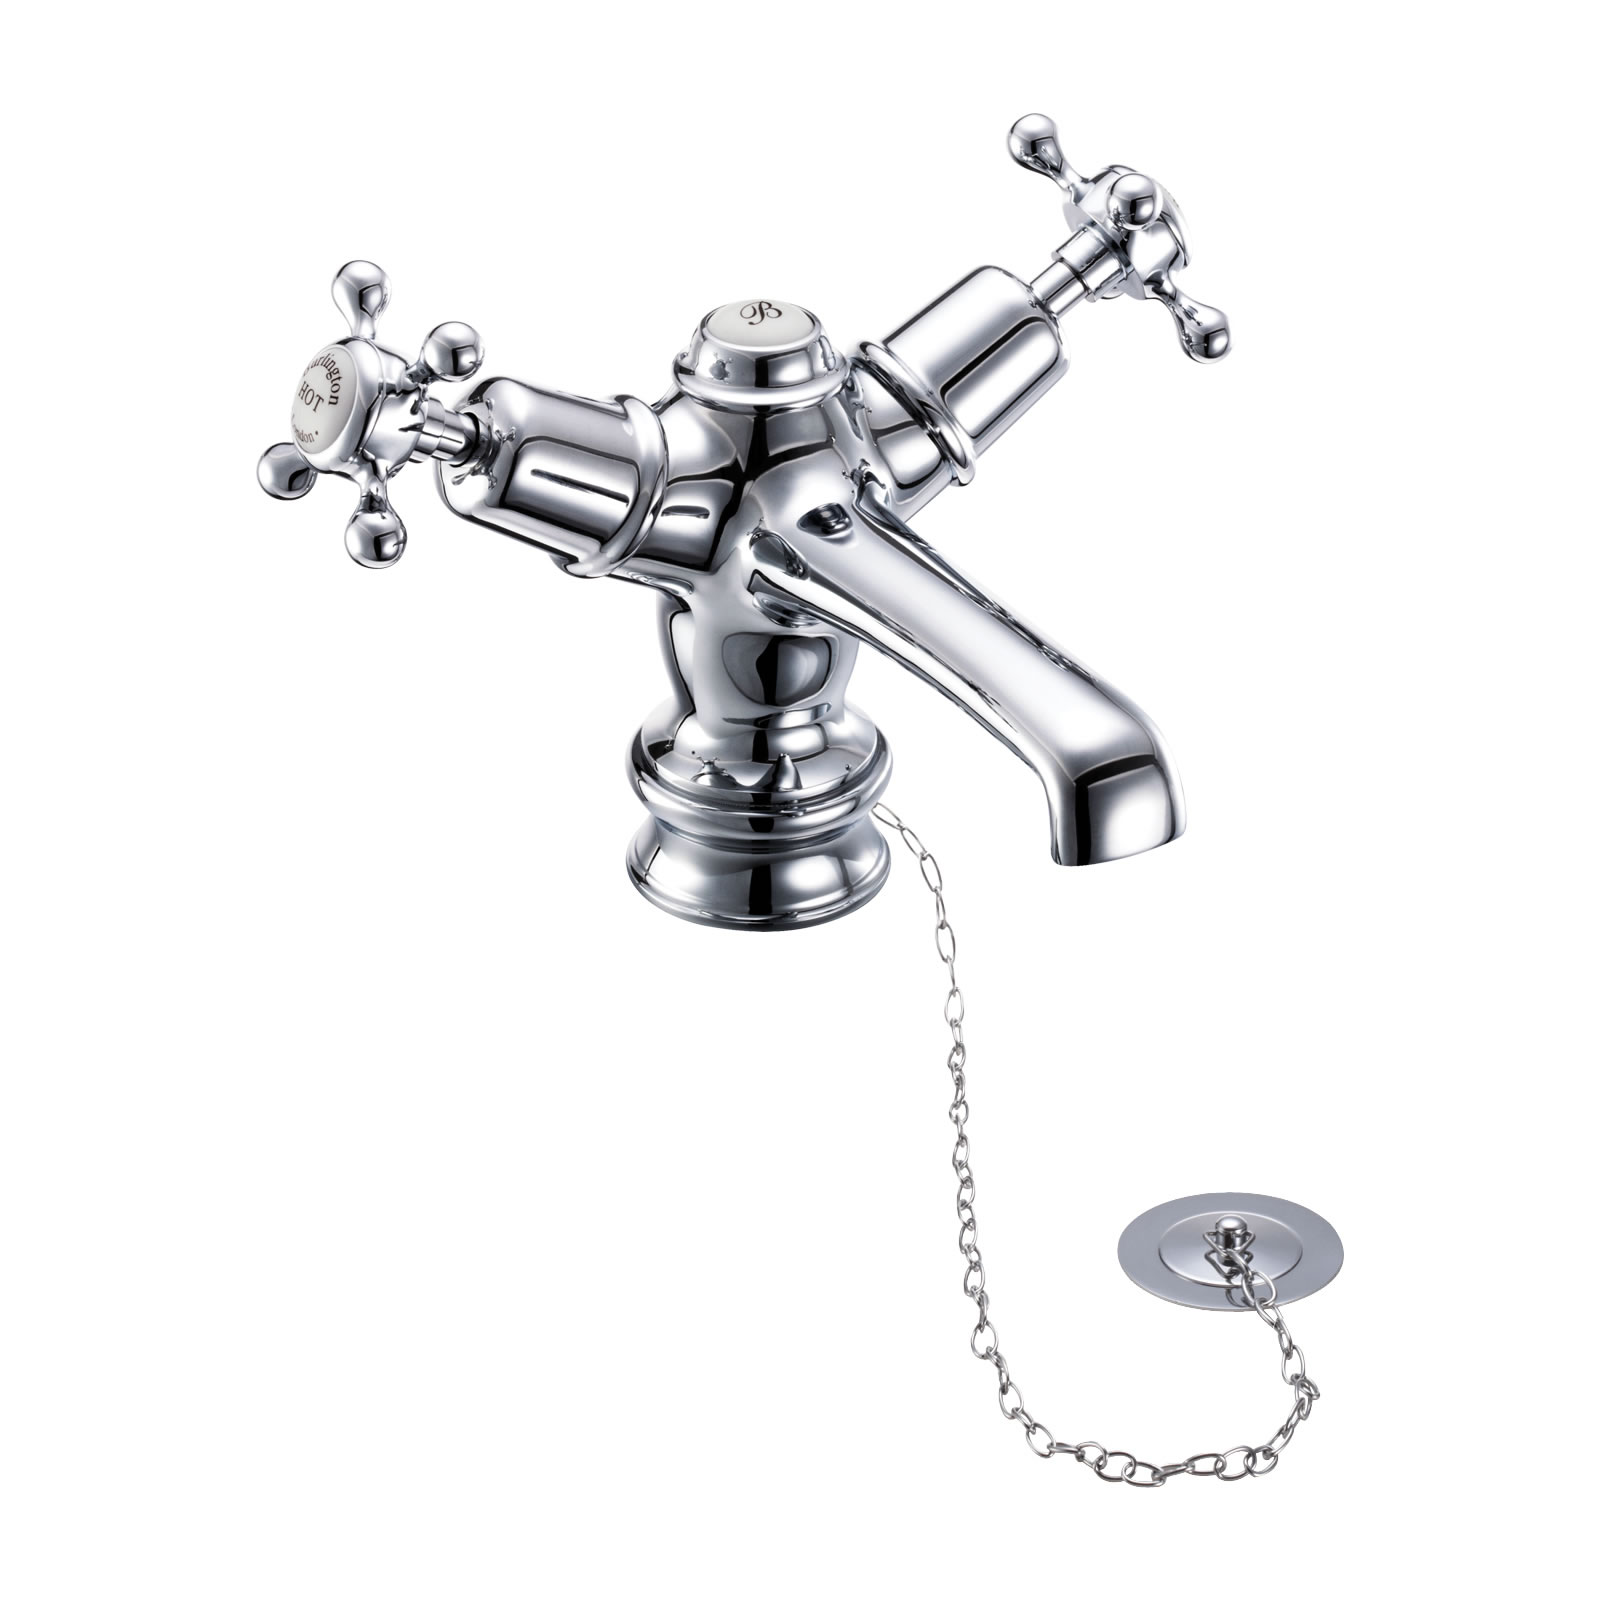 Claremont Regent basin mixer with low central indice with plug and chain waste